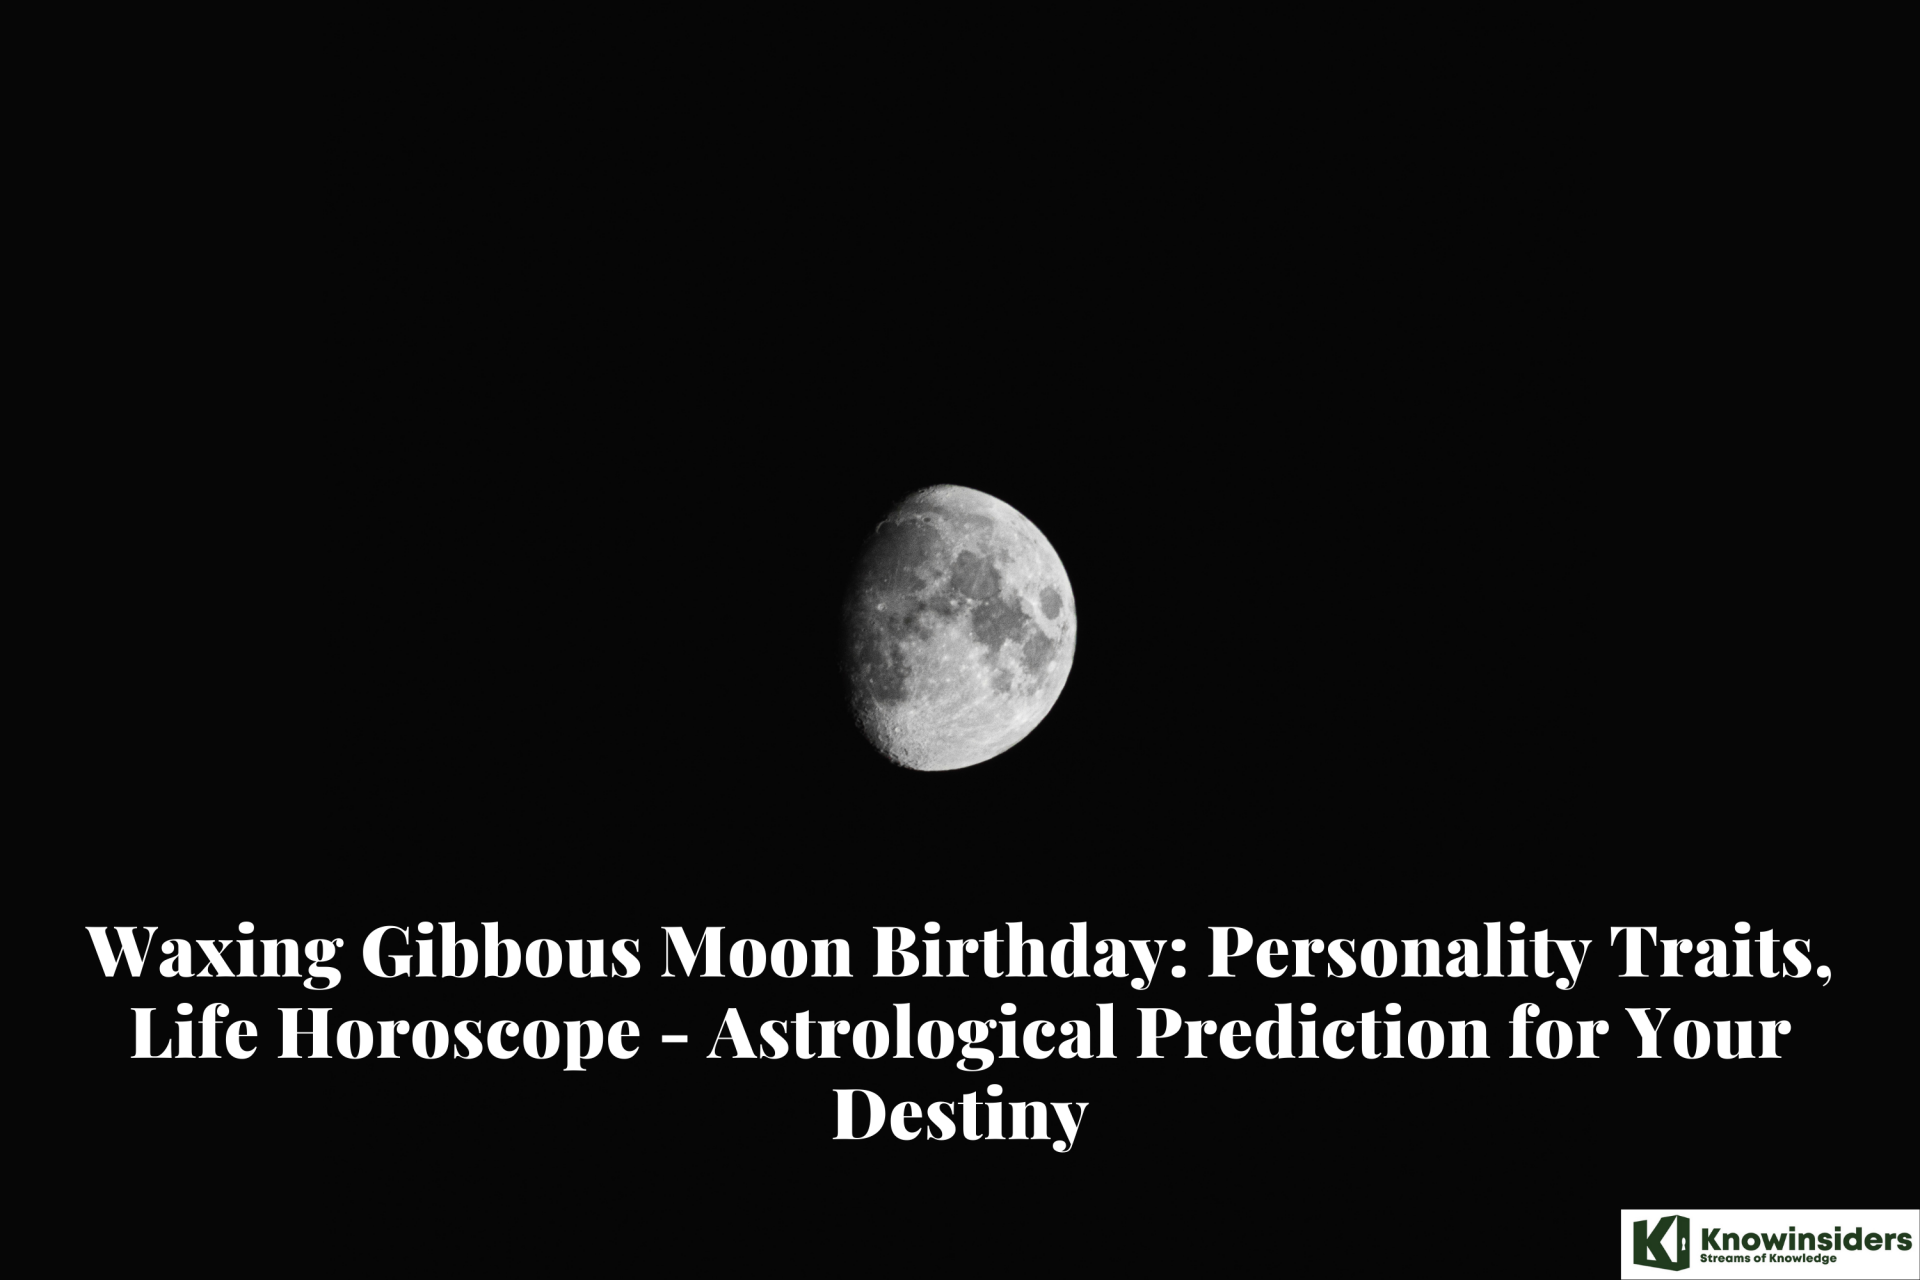 Waxing Gibbous Moon Birthday: Personality Traits, Life Horoscope - Prediction for Your Destiny